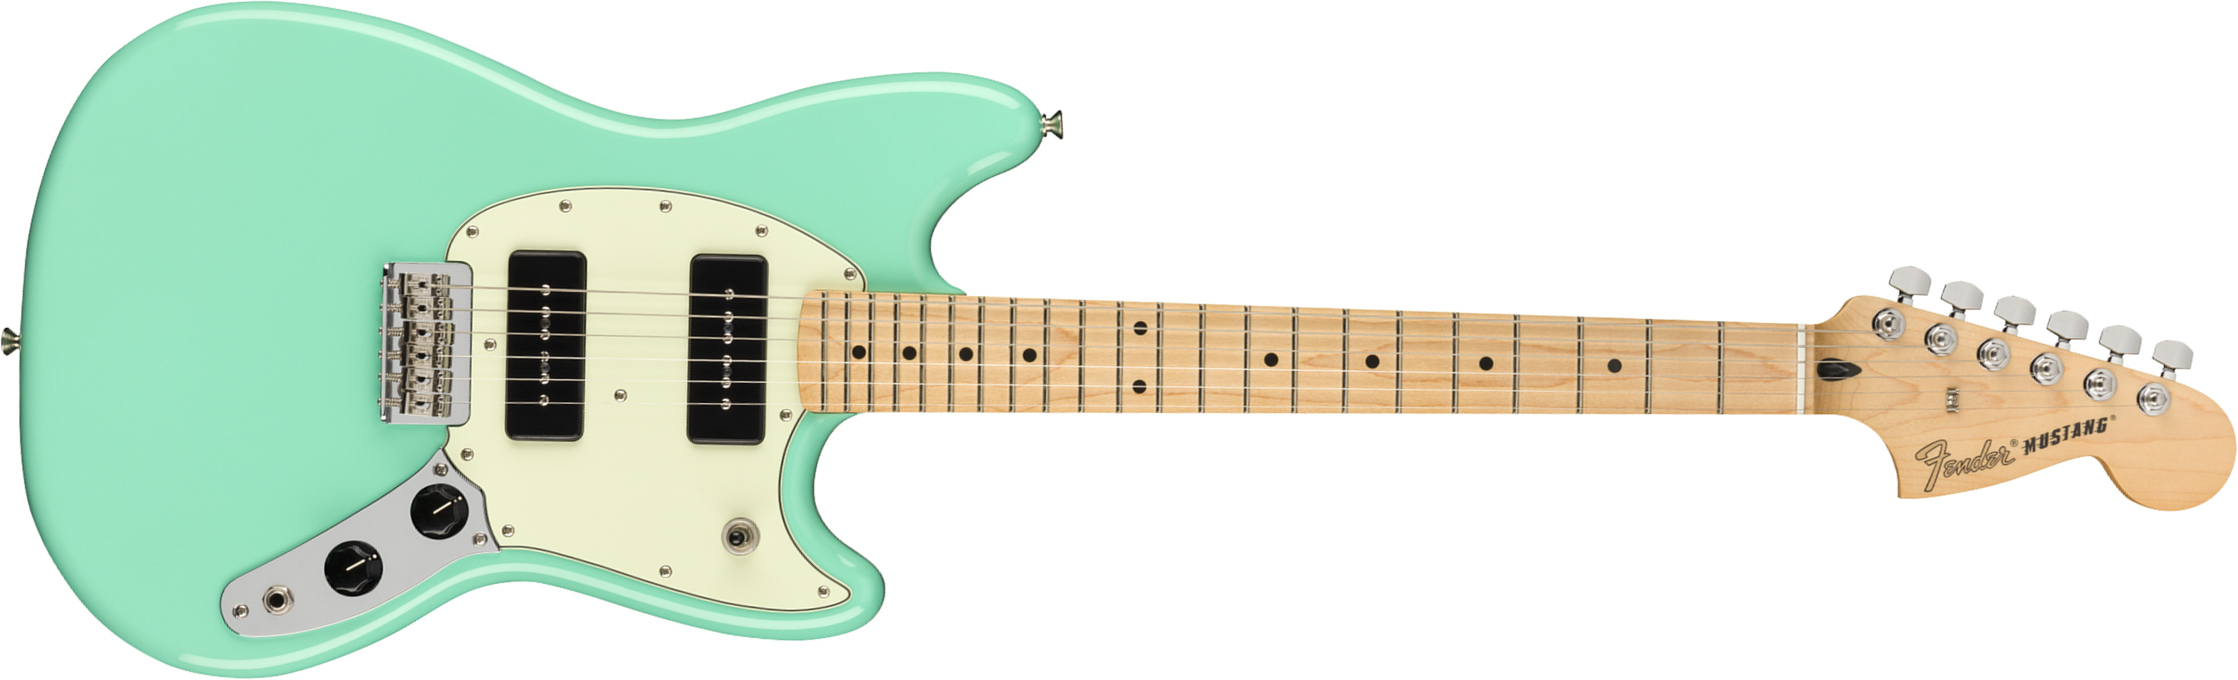 Fender Mustang Player 90 Mex Ht 2p90 Mn - Seafoam Green - Retro rock electric guitar - Main picture